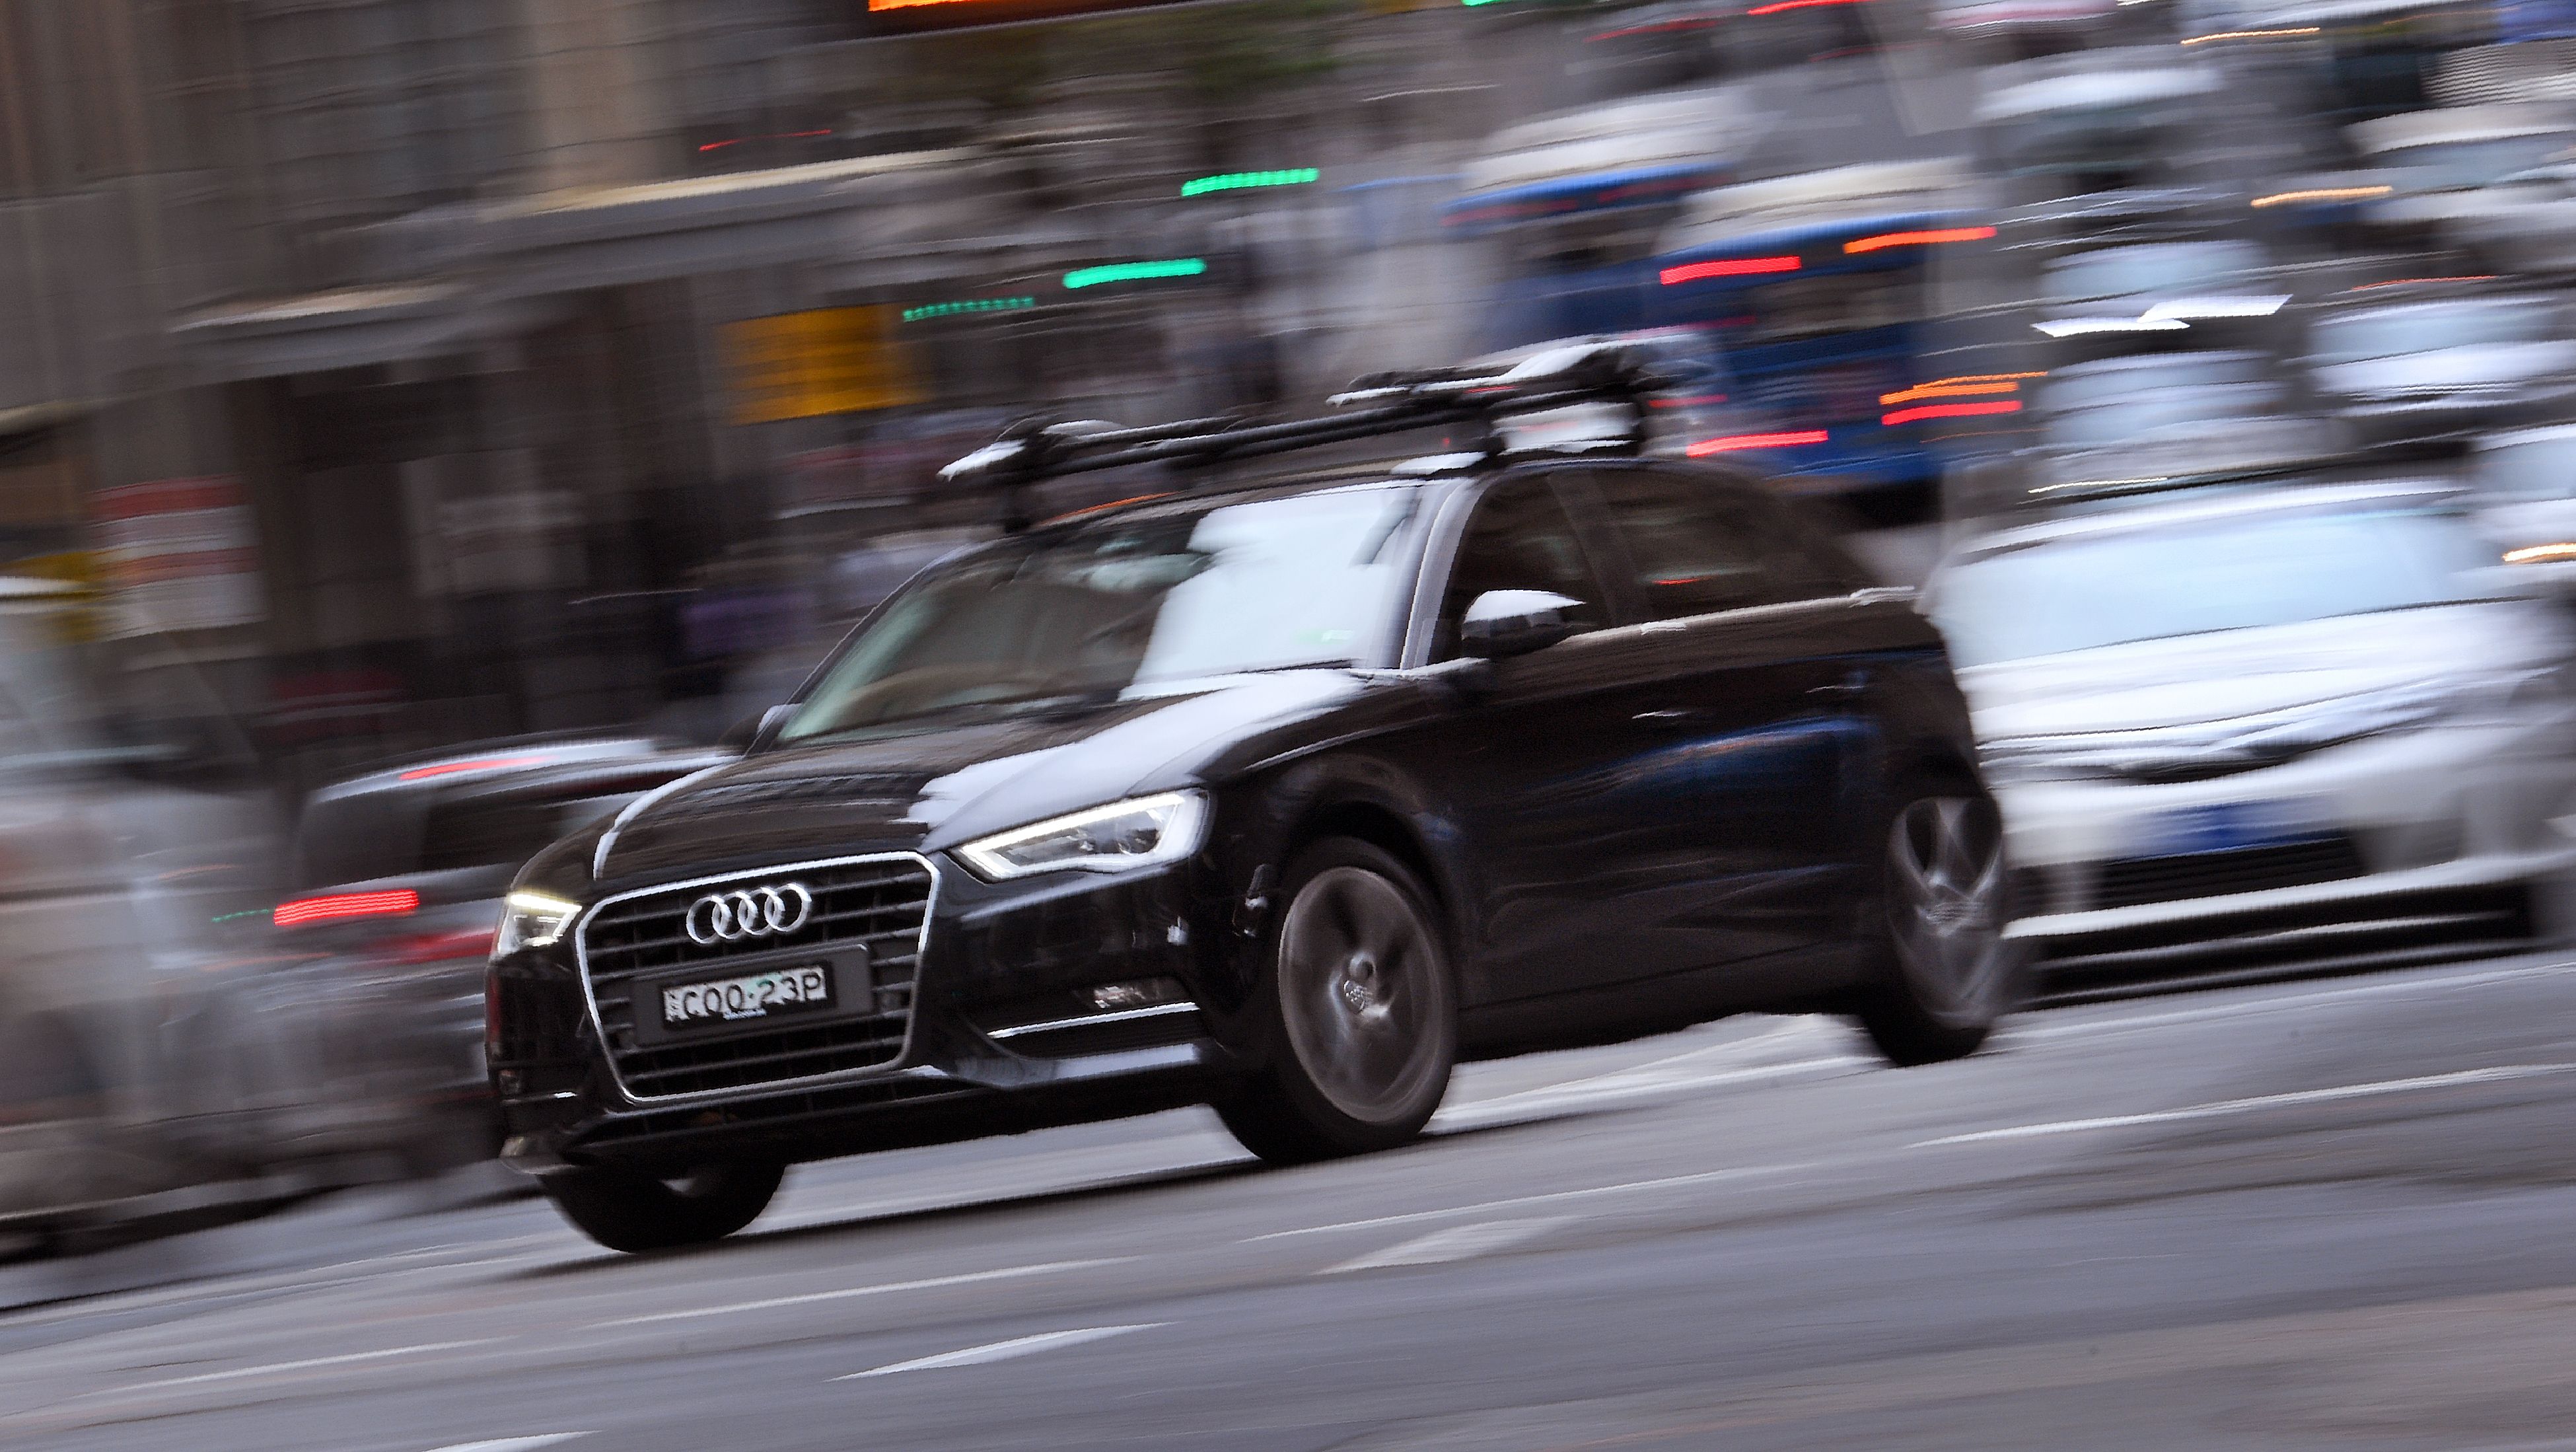 An Audi seen on the streets of Sydney, Australia on March 8, 2017 | Source: Getty Images